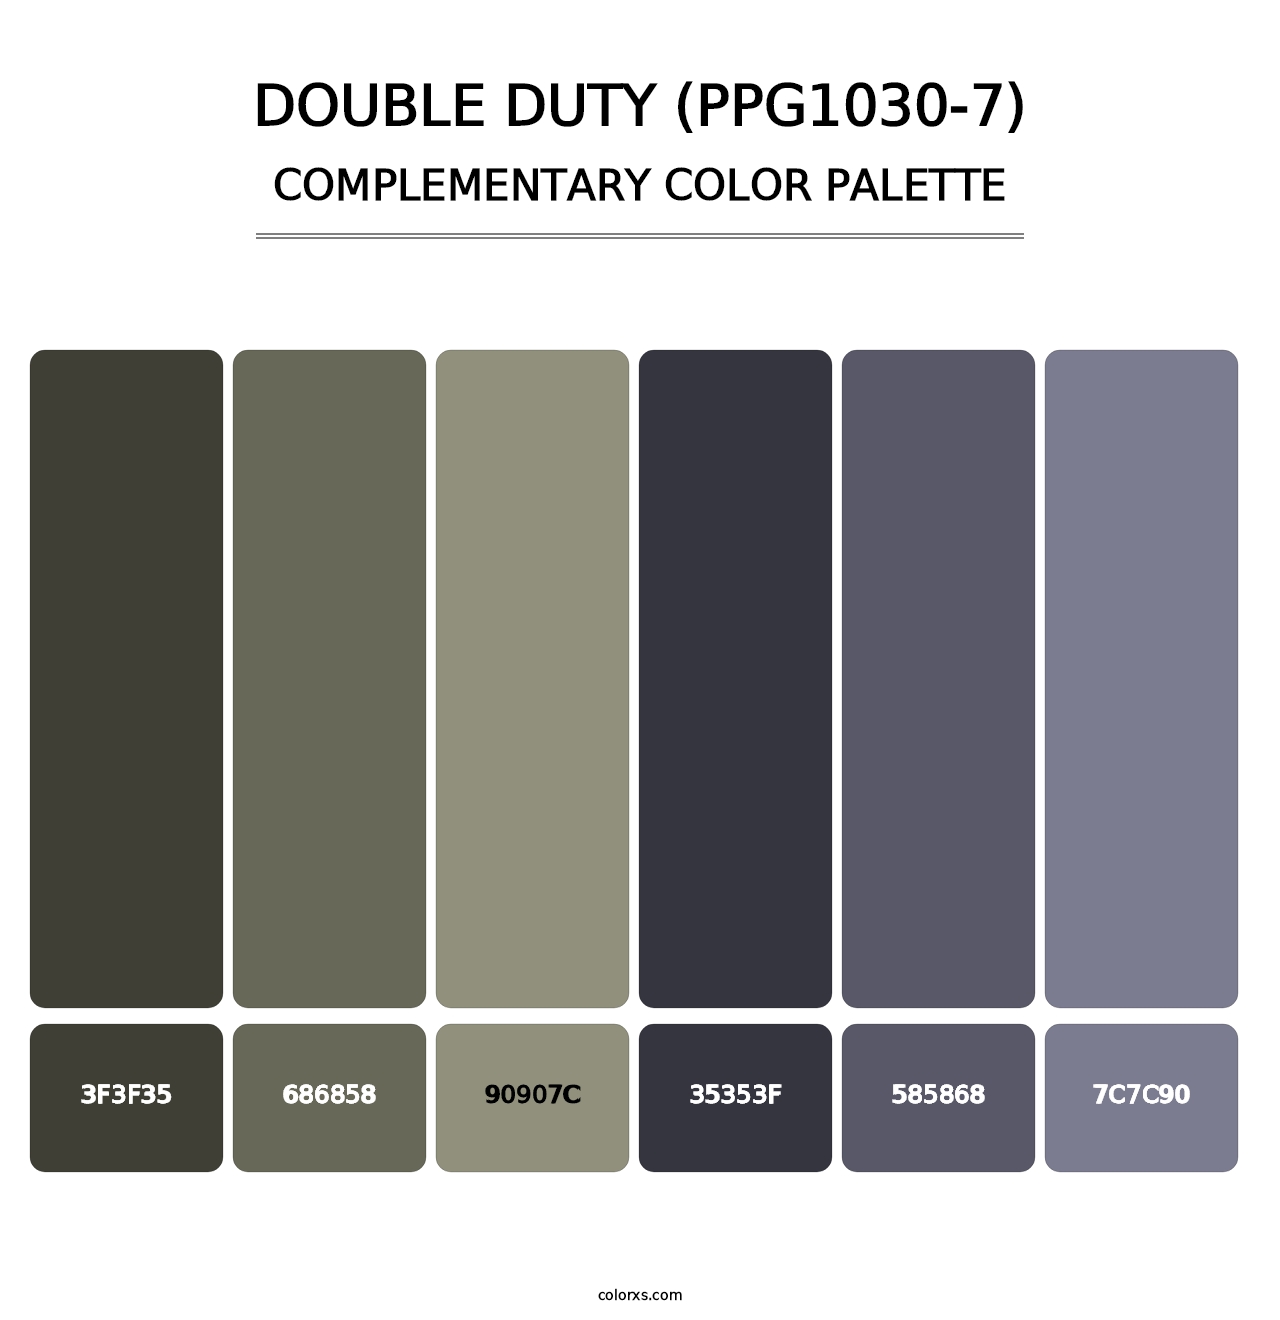 Double Duty (PPG1030-7) - Complementary Color Palette